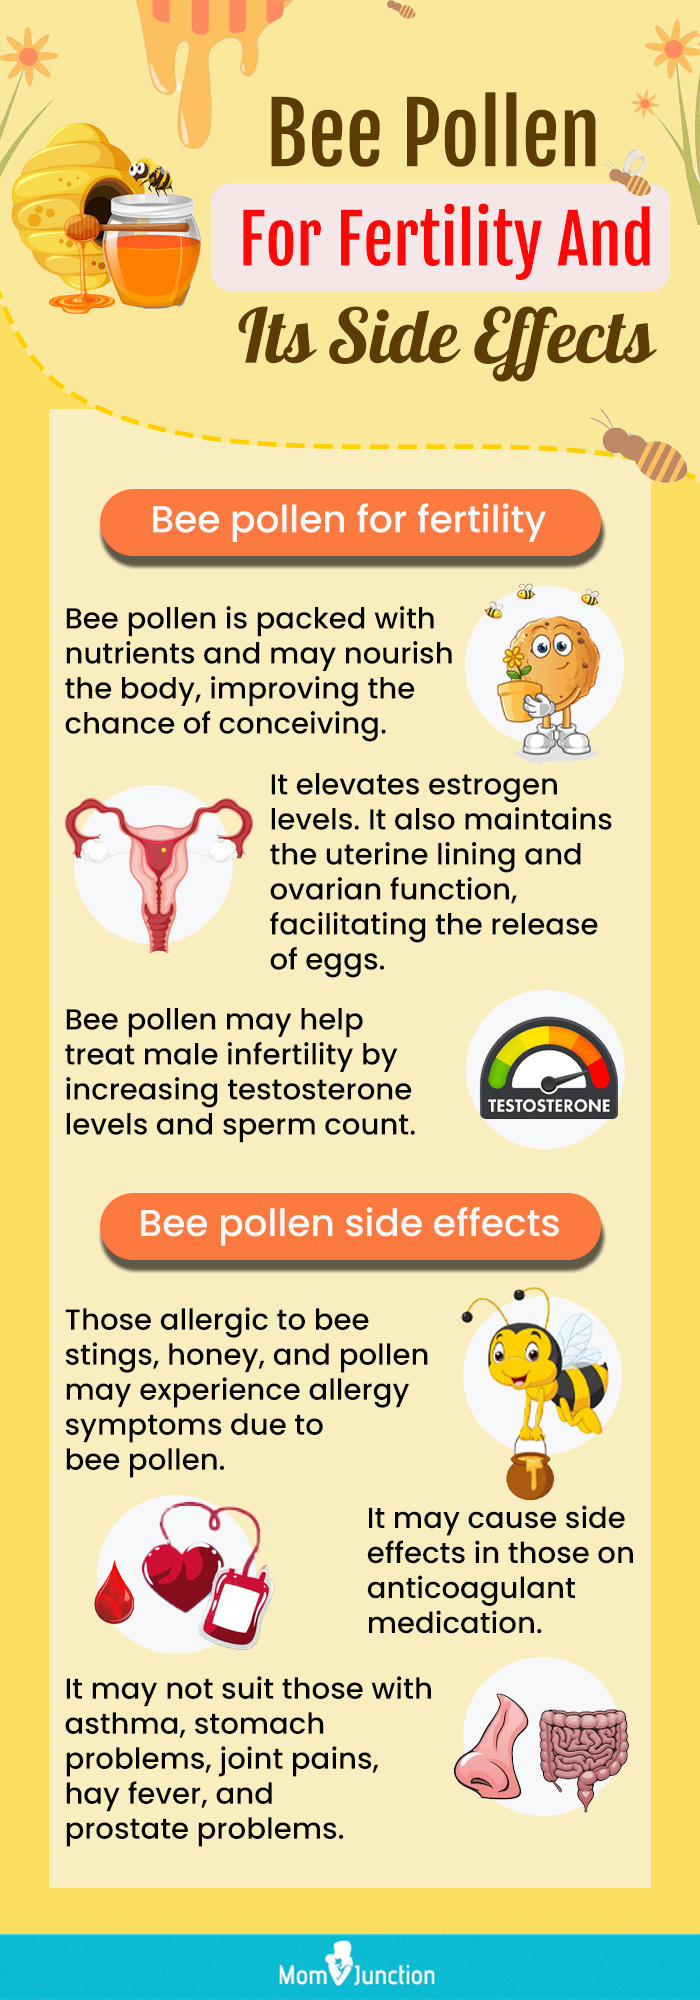 bee pollen for fertility and its side effects (infographic)